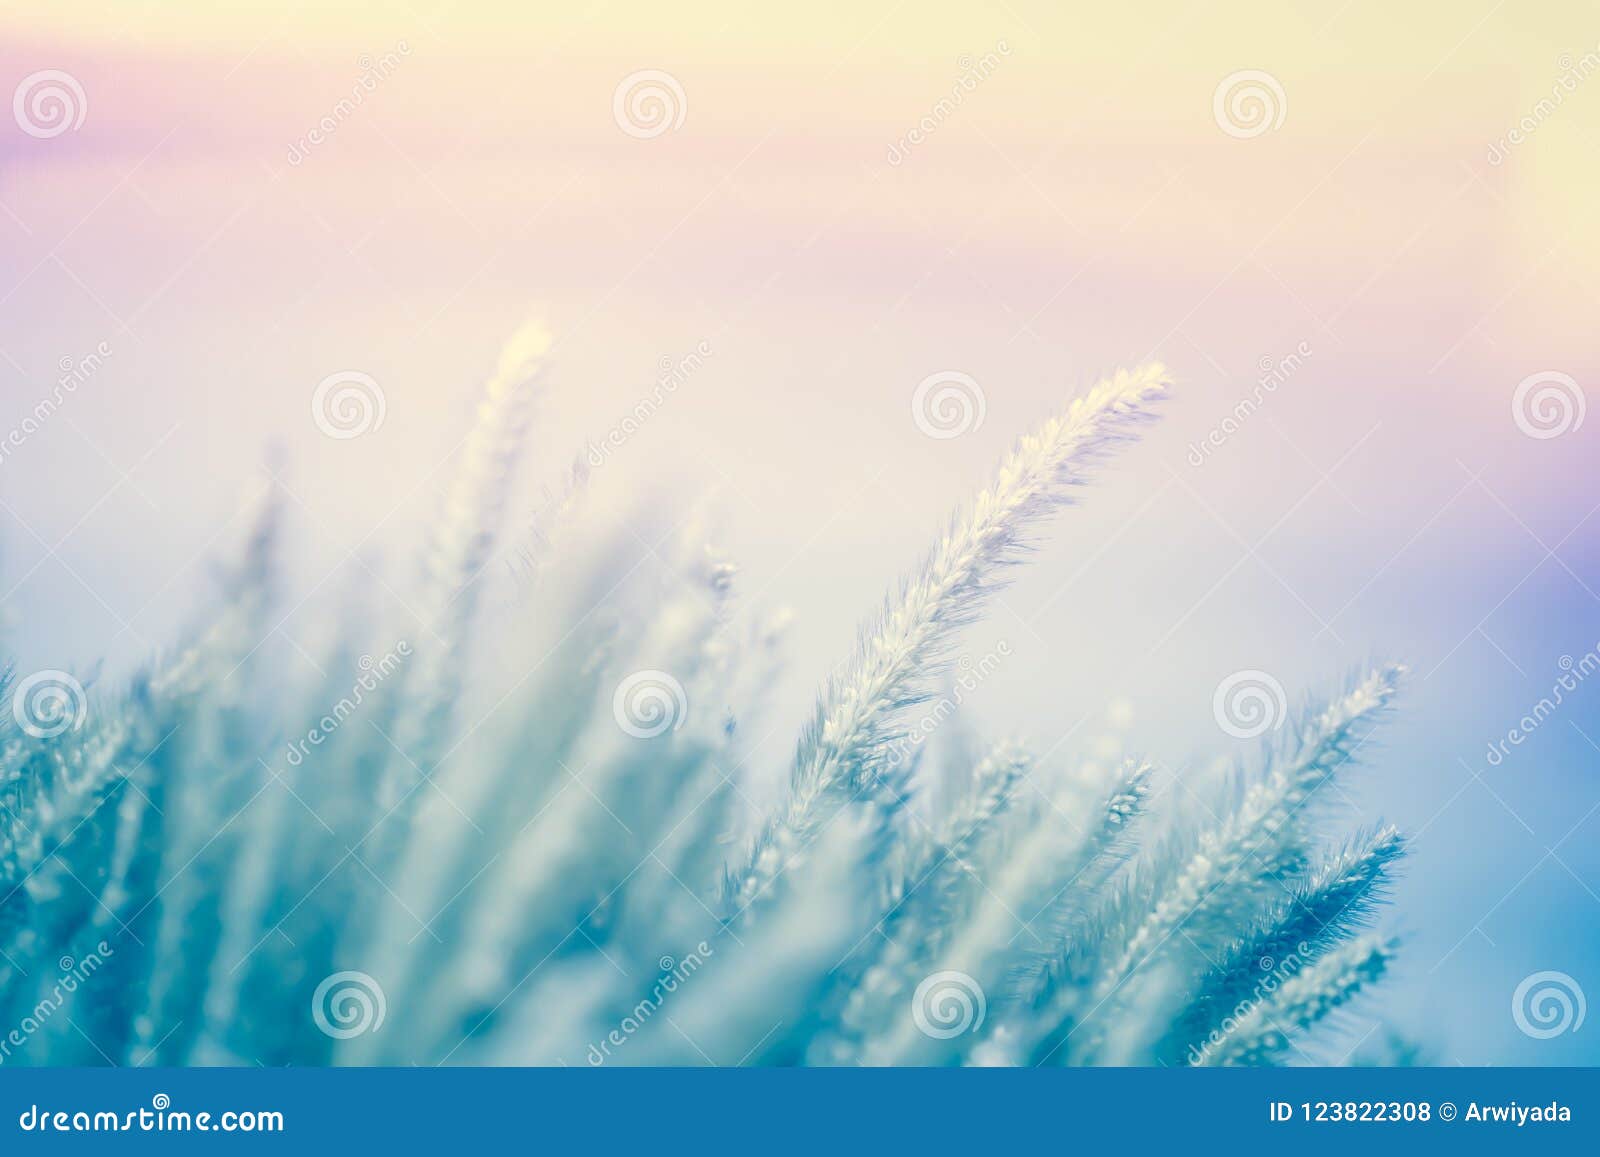 Background of Bright Light Beautiful Soft Color Blur. Stock Photo - Image of glow, 123822308